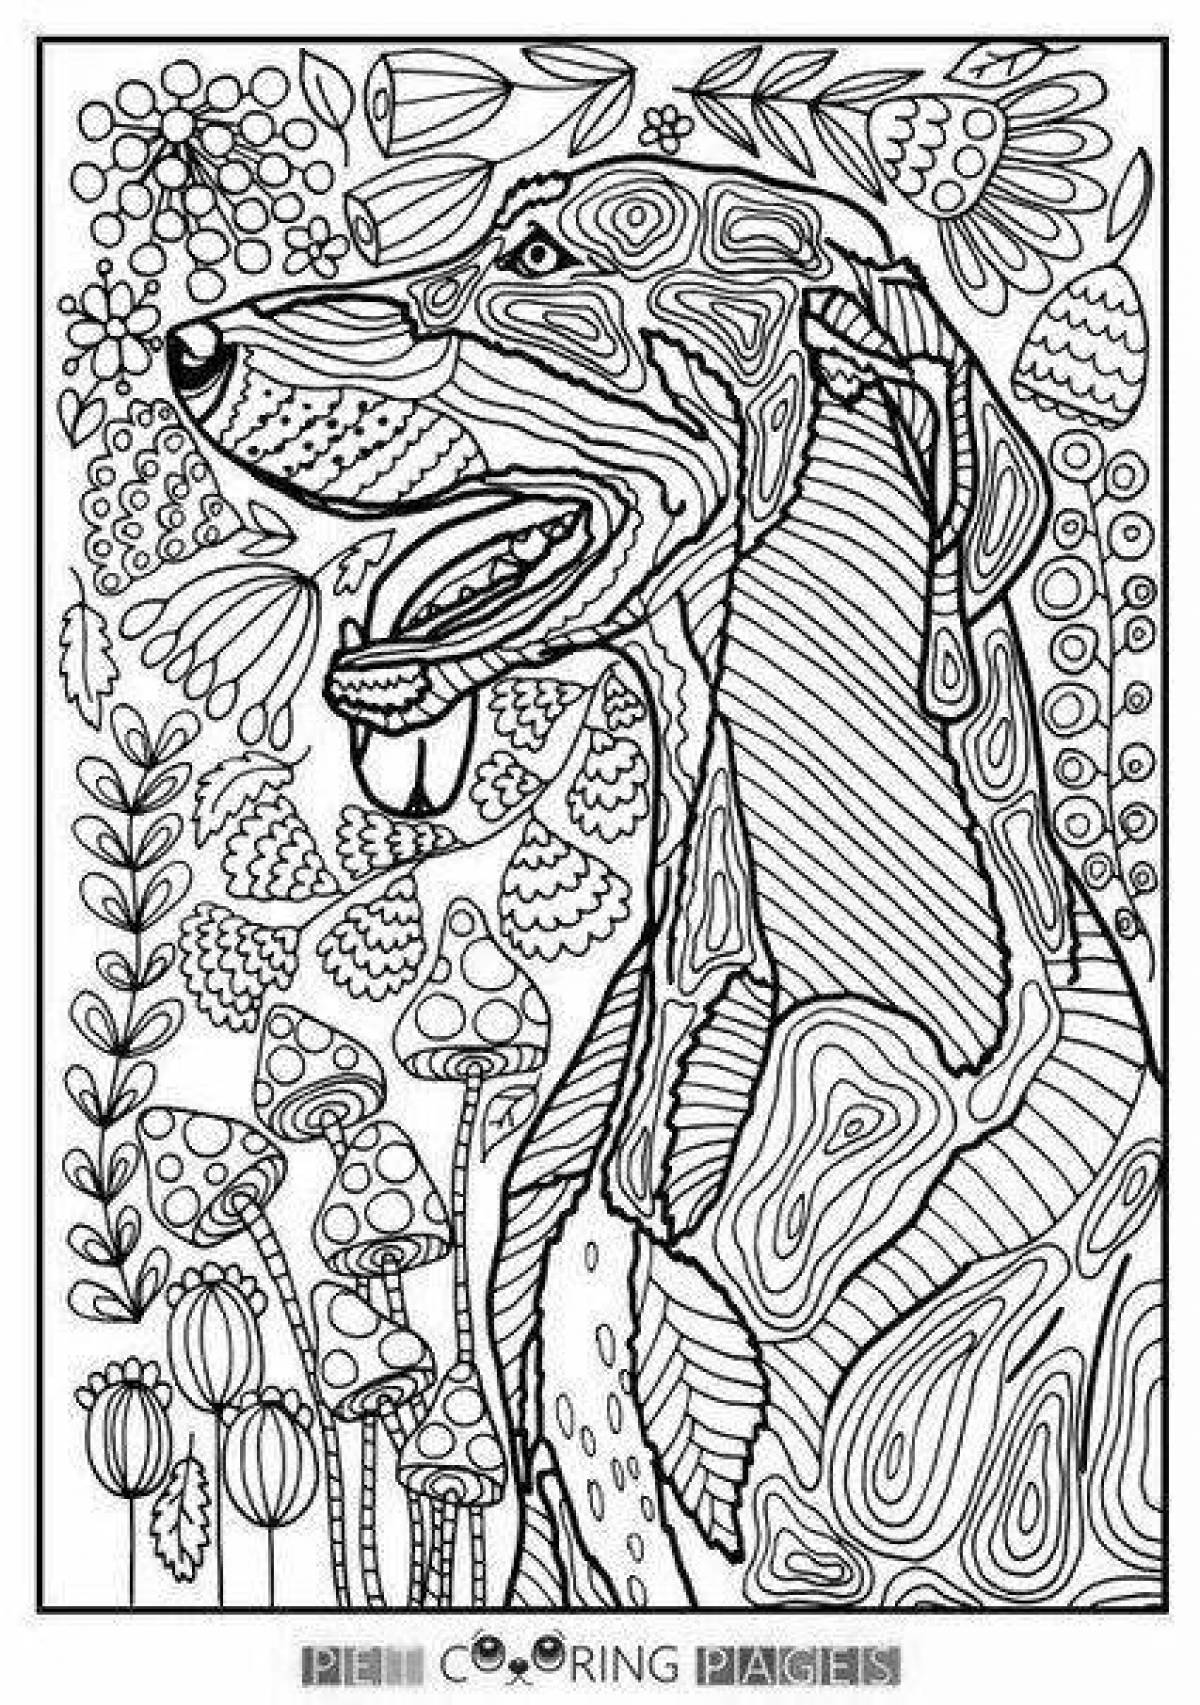 Disturbing dog coloring pages for adults